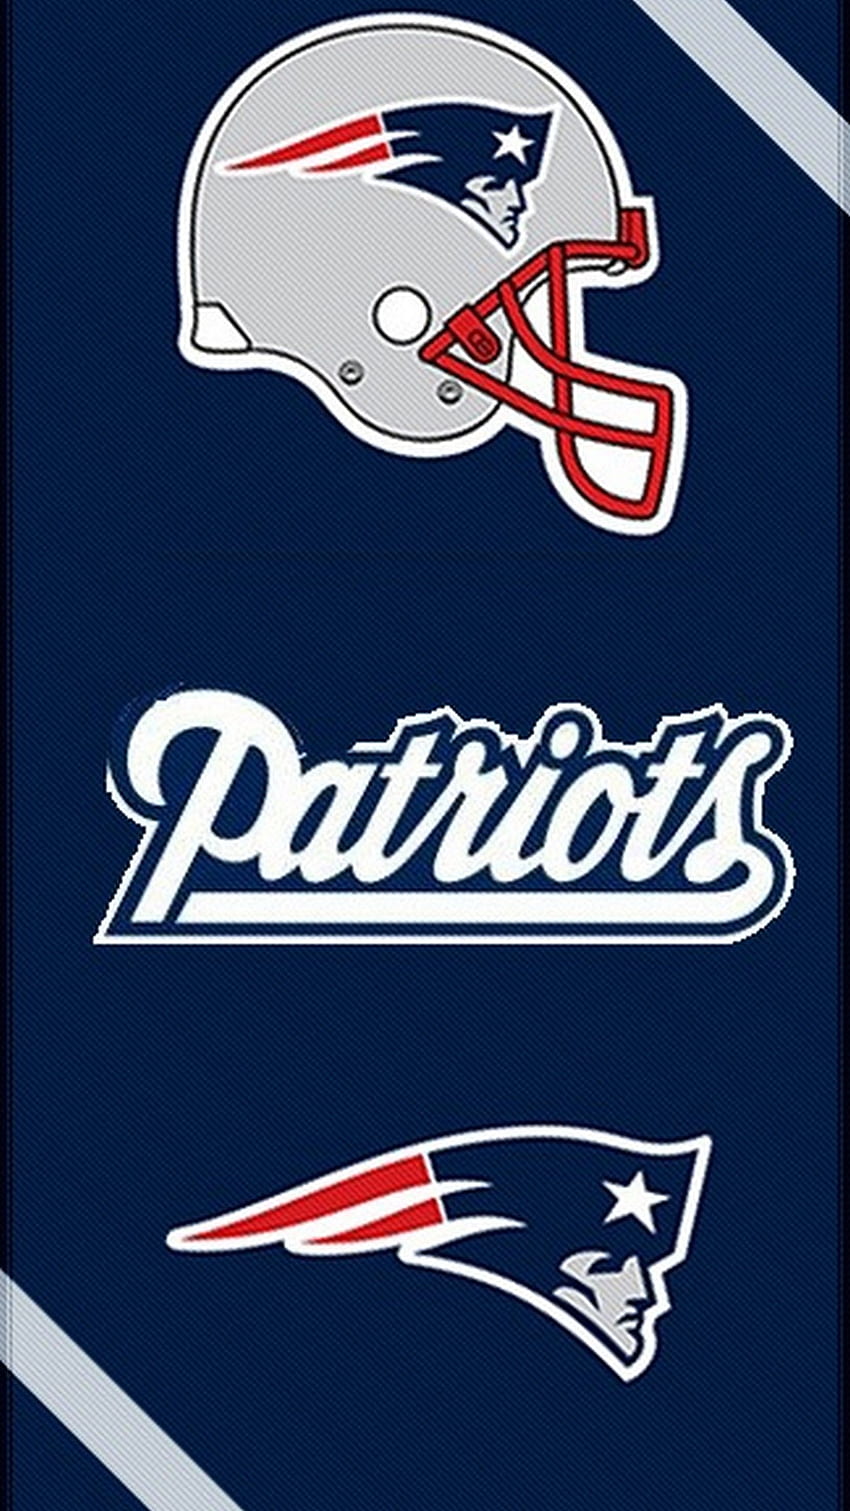 New England Patriots Wallpapers  Top Best 35 New England Patriots  Backgrounds